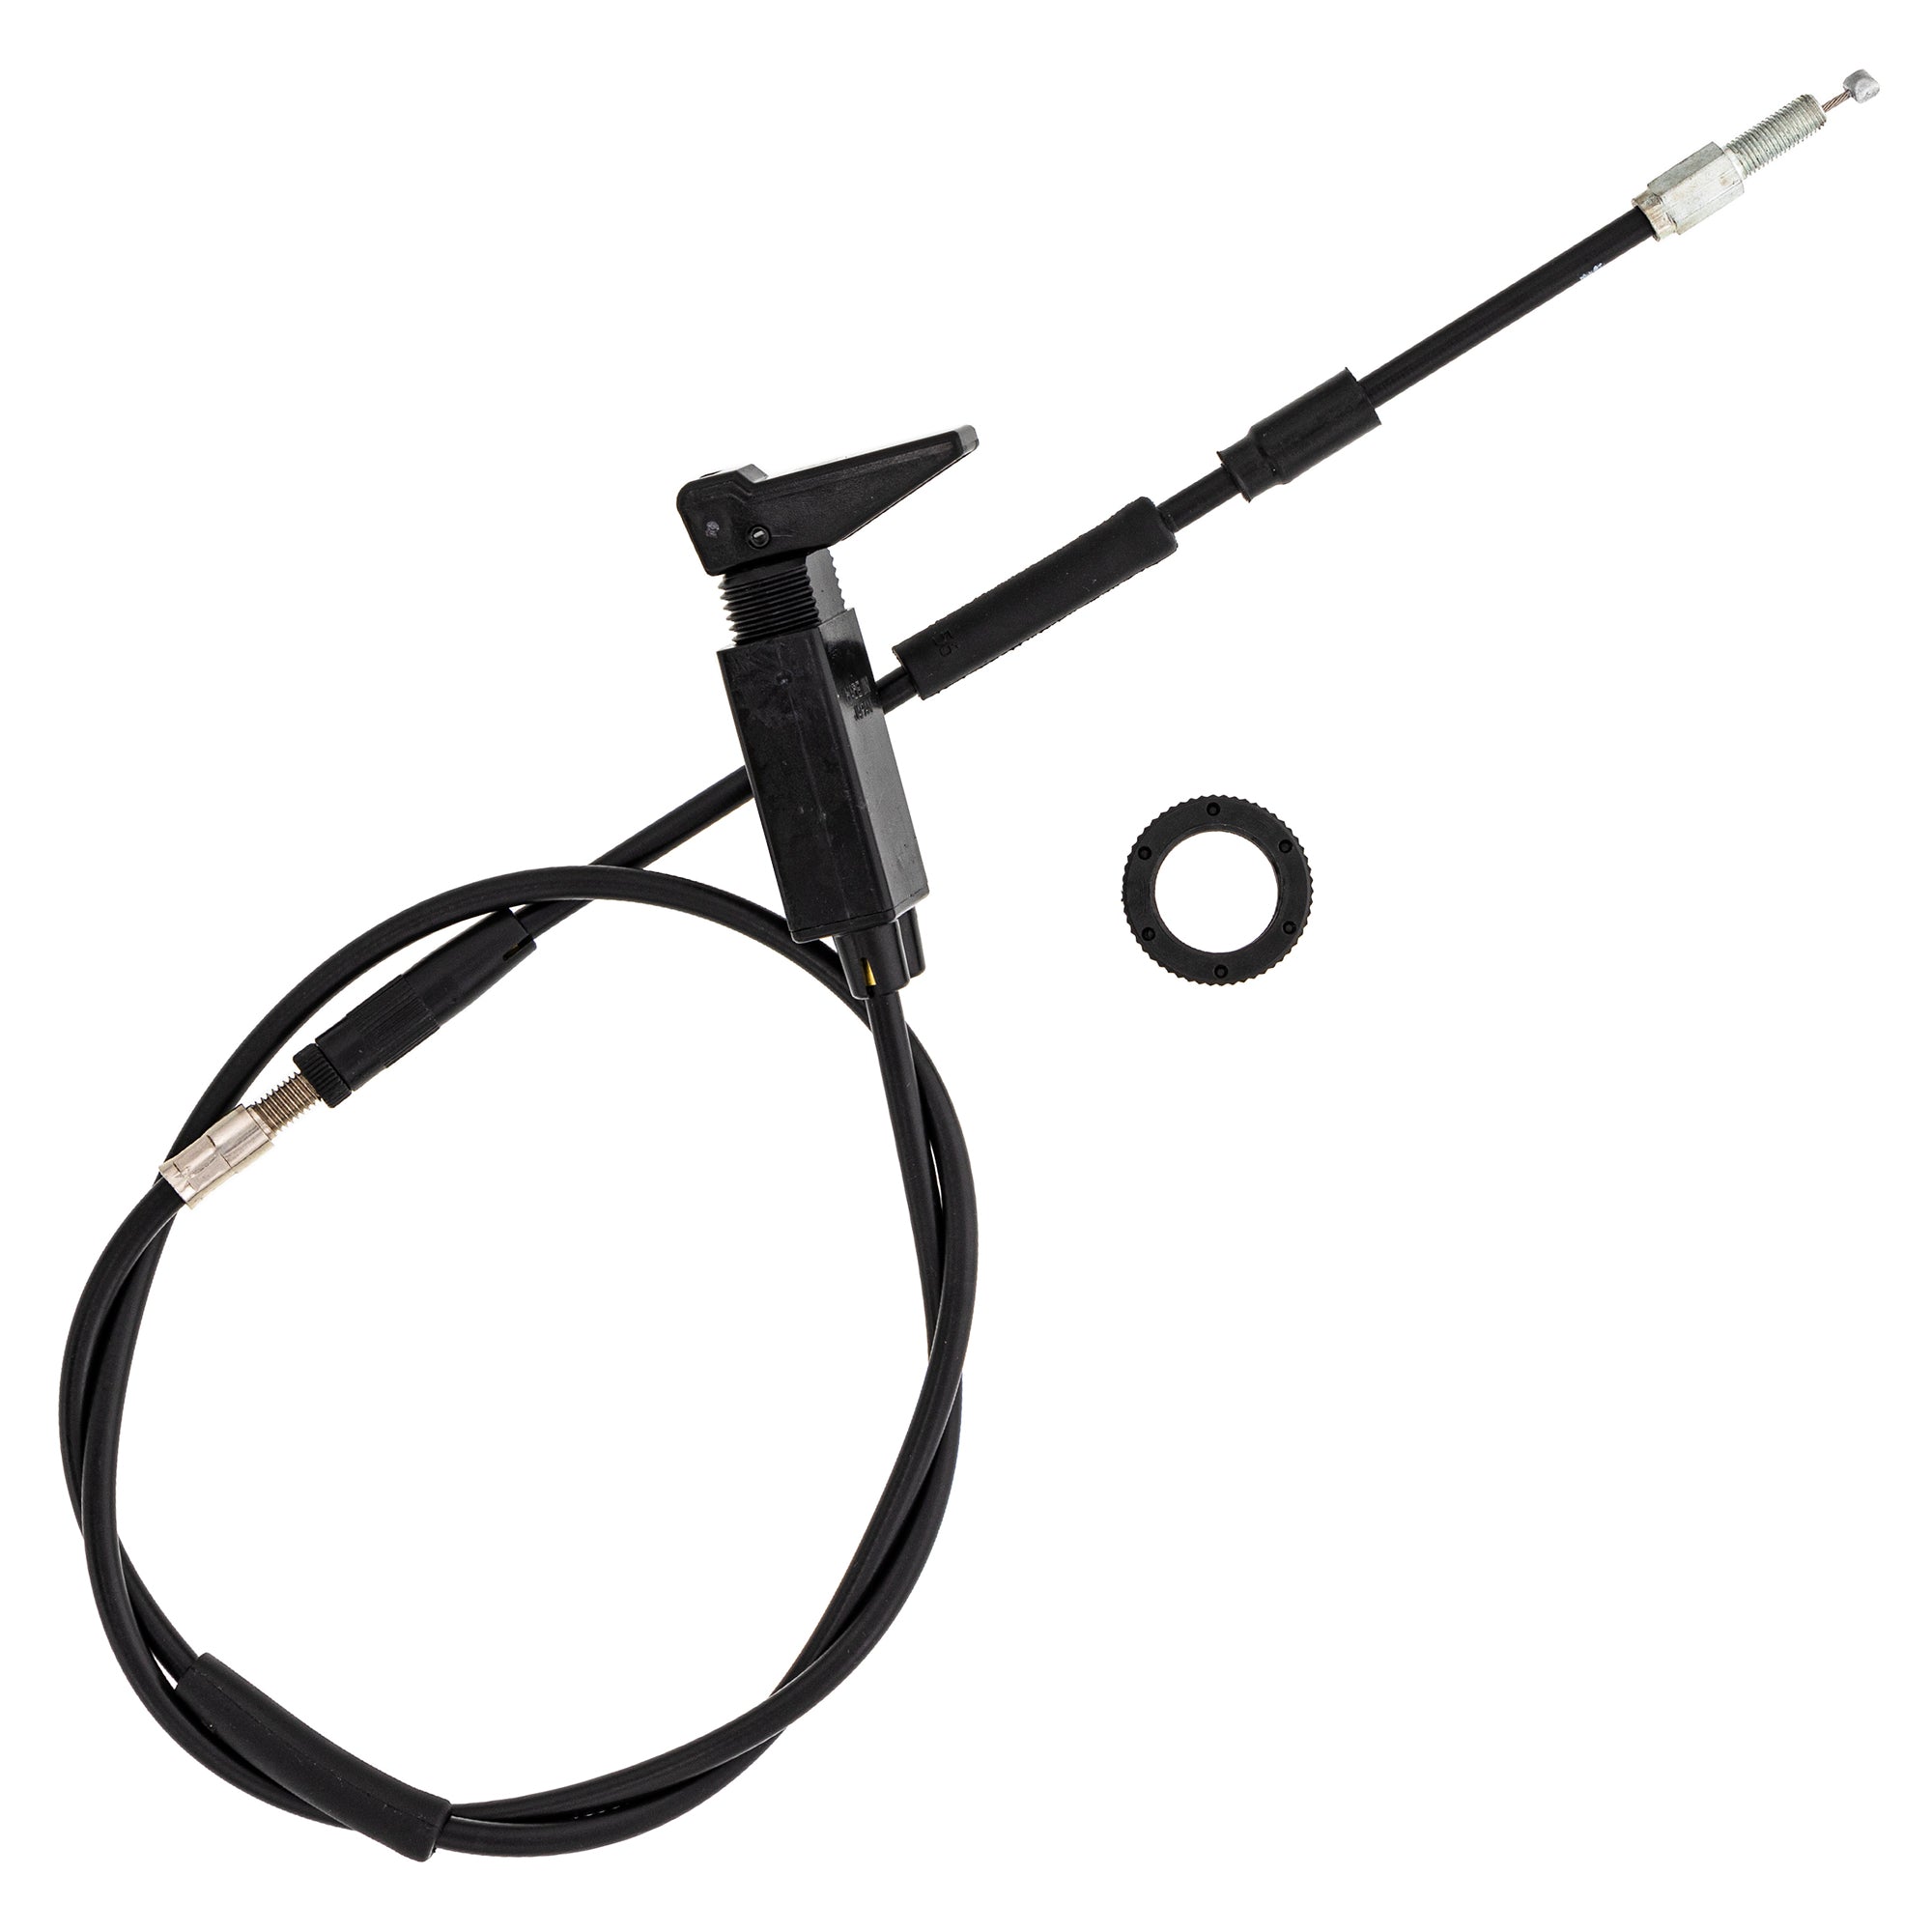 Genuine OEM Polaris Choke Cable Sportsman Magnum Xpedition Worker 7080726